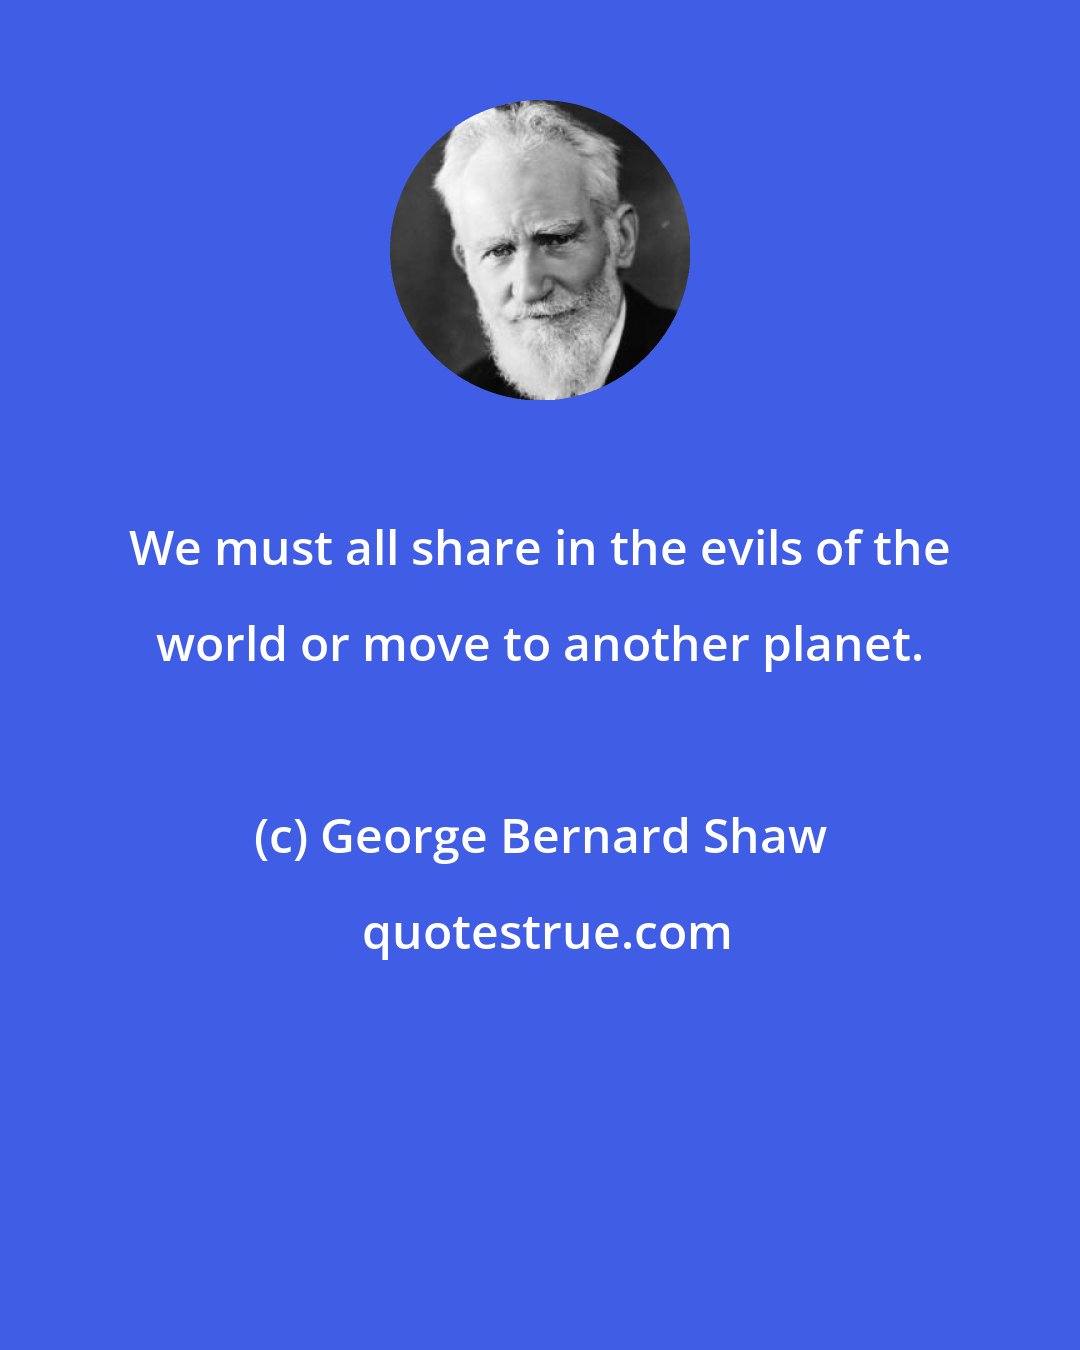 George Bernard Shaw: We must all share in the evils of the world or move to another planet.